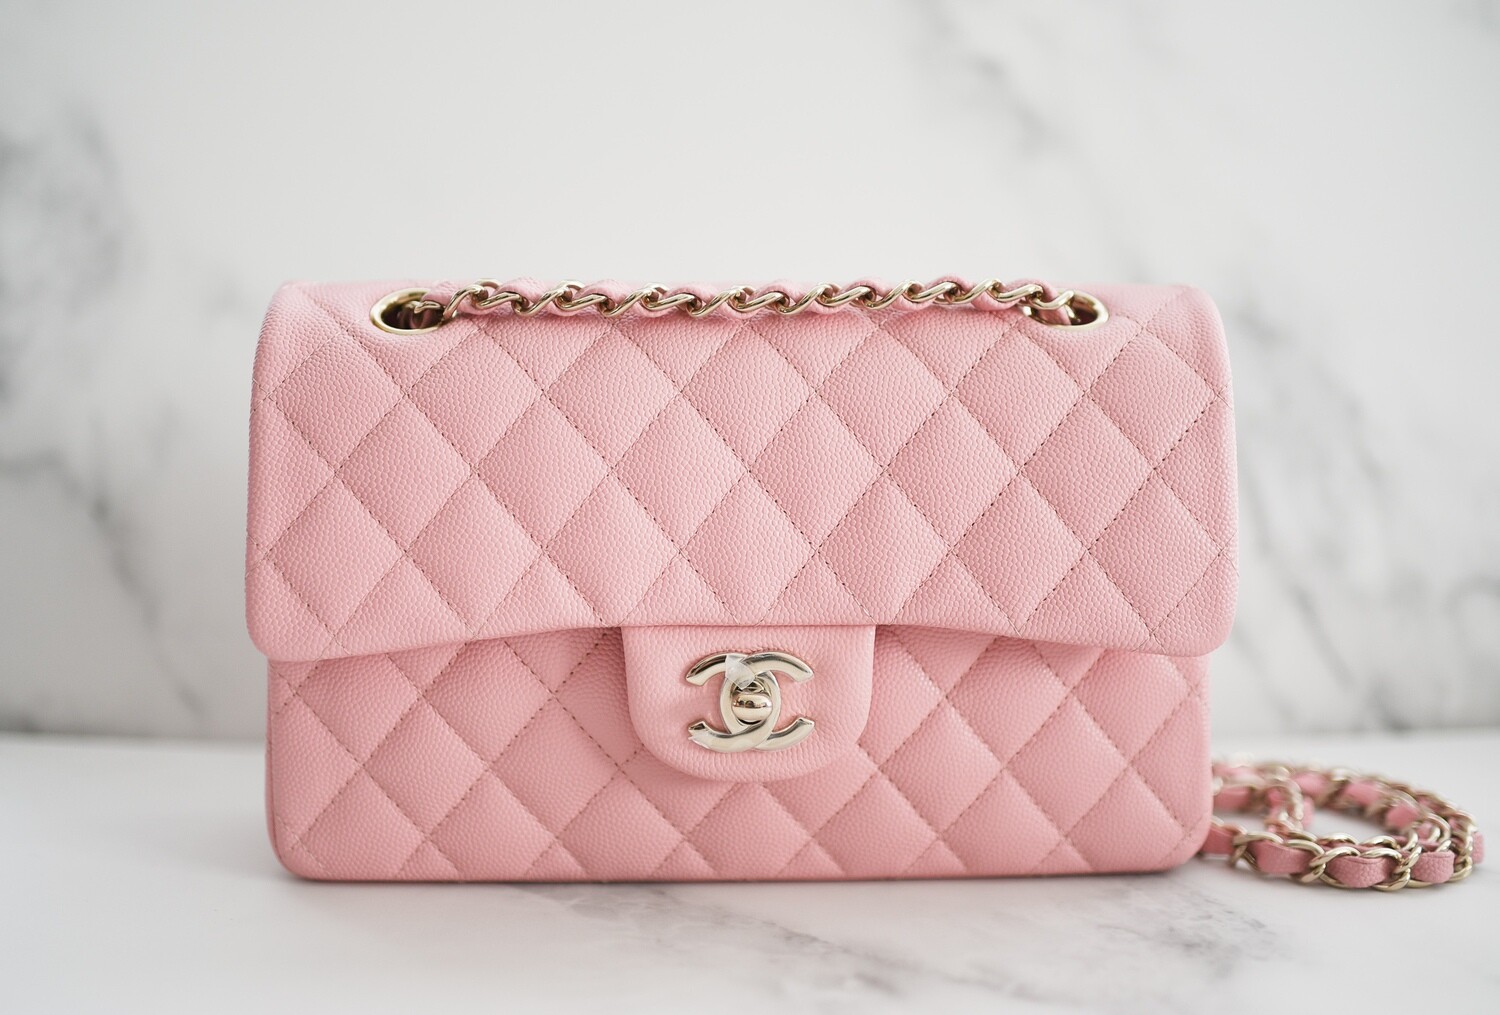 Chanel Classic Double Flap Small, 22C Pink Caviar Leather with Gold Hardware,  New In Box - Julia Rose Boston